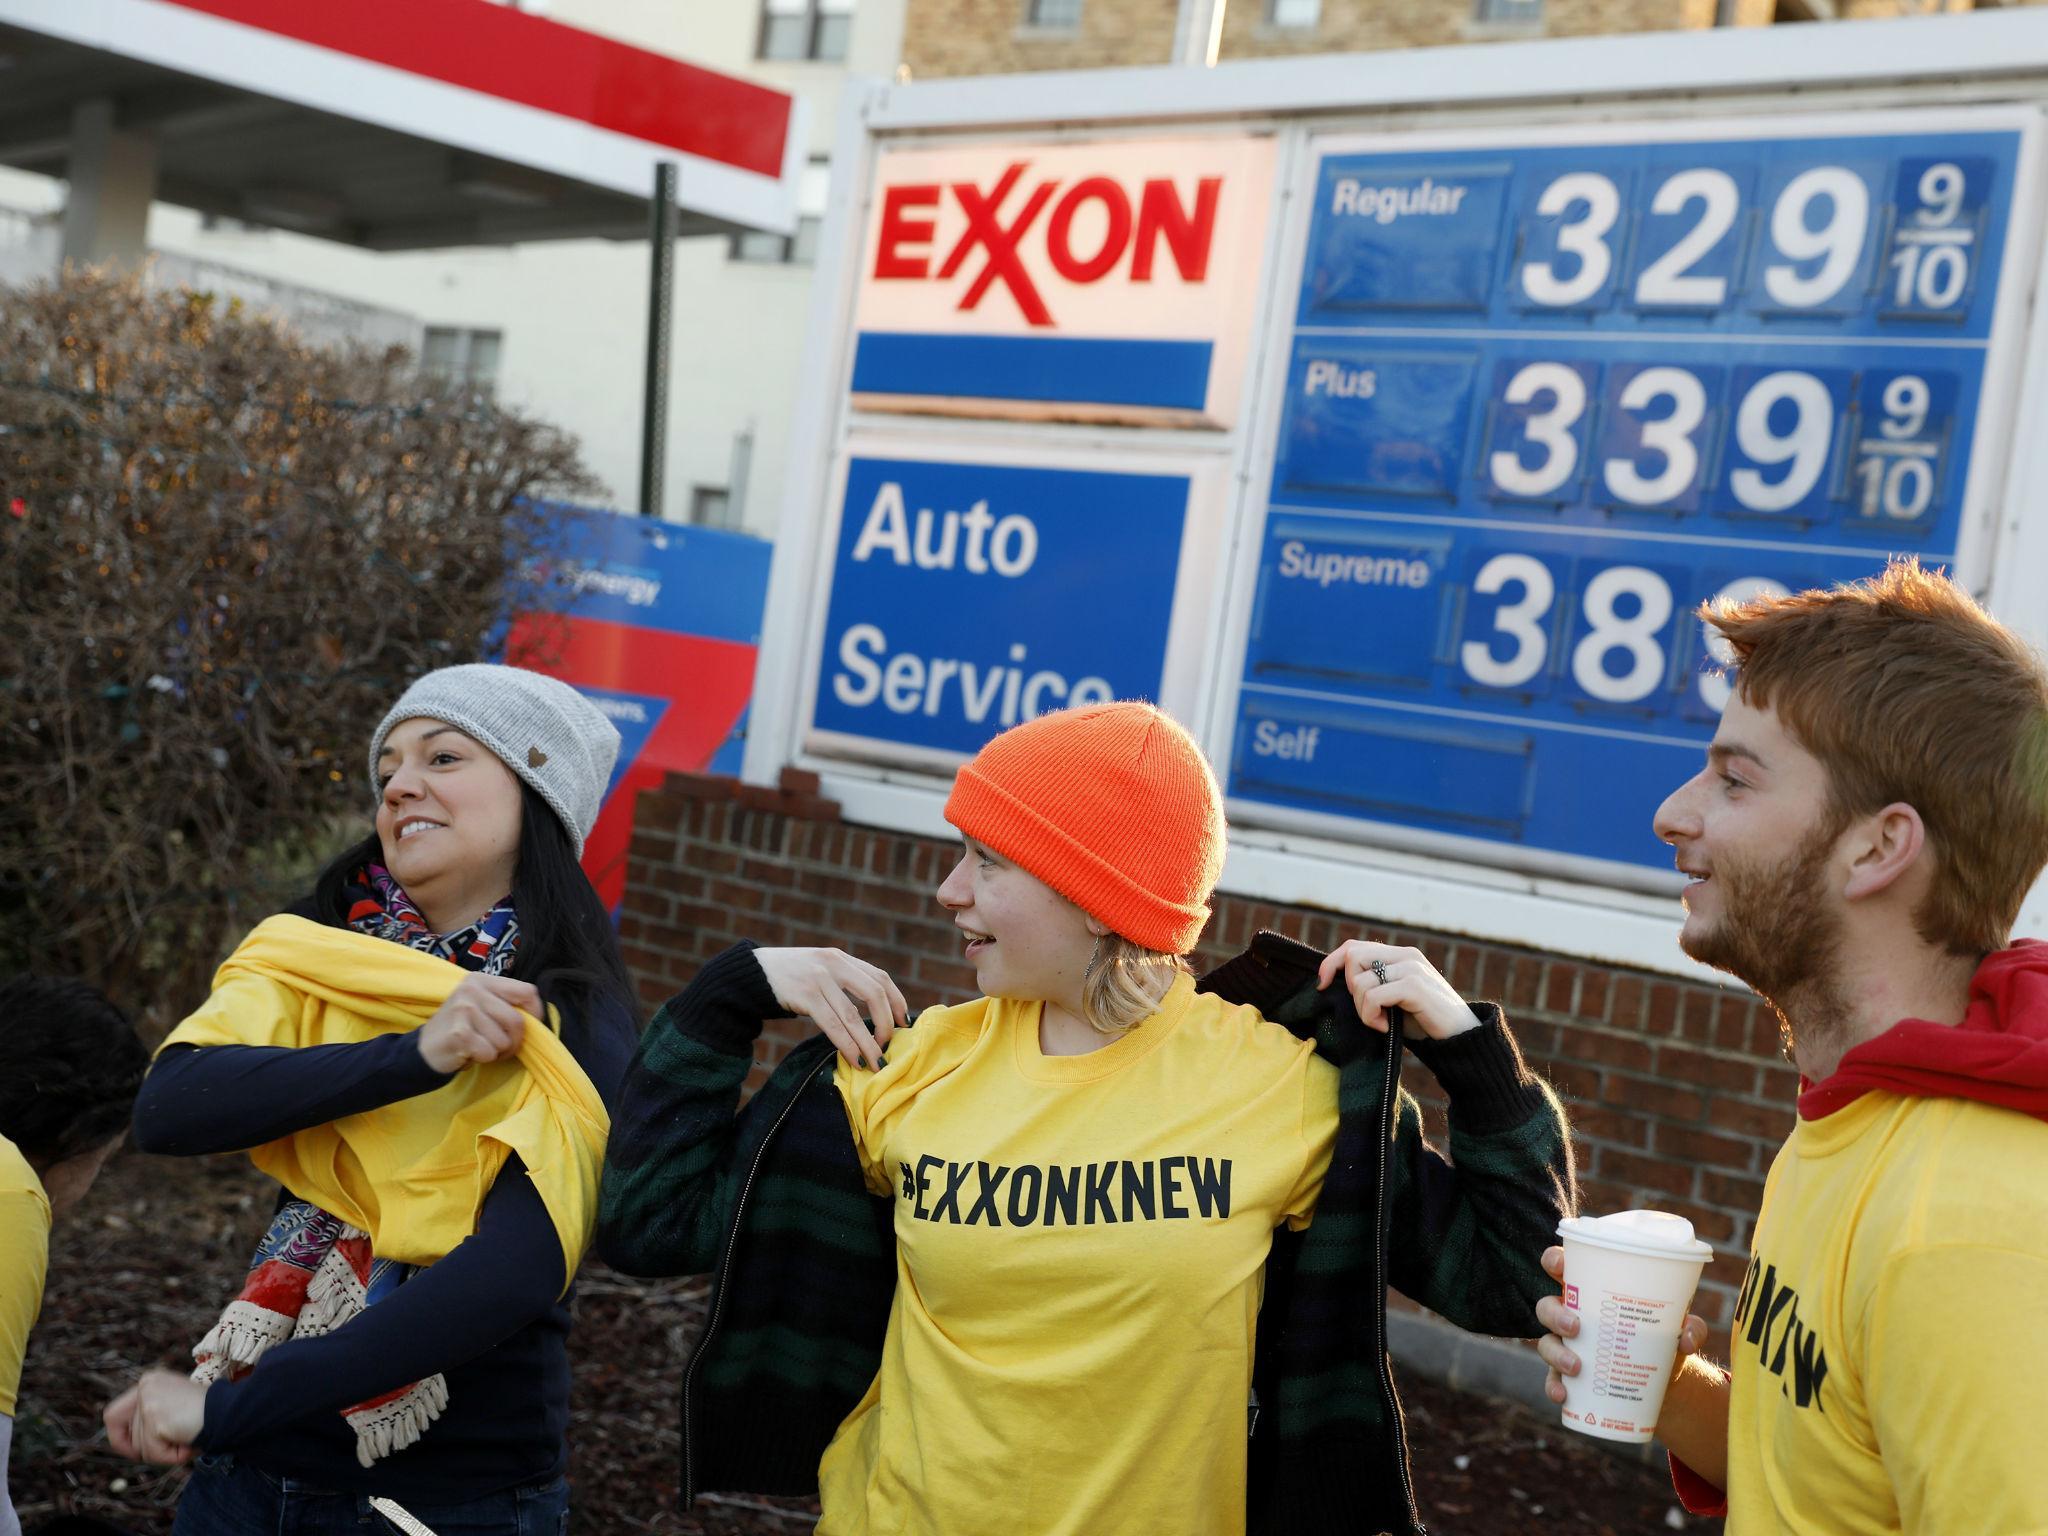 Protesters are pictured near an Exxon gas station in Washington in 2017